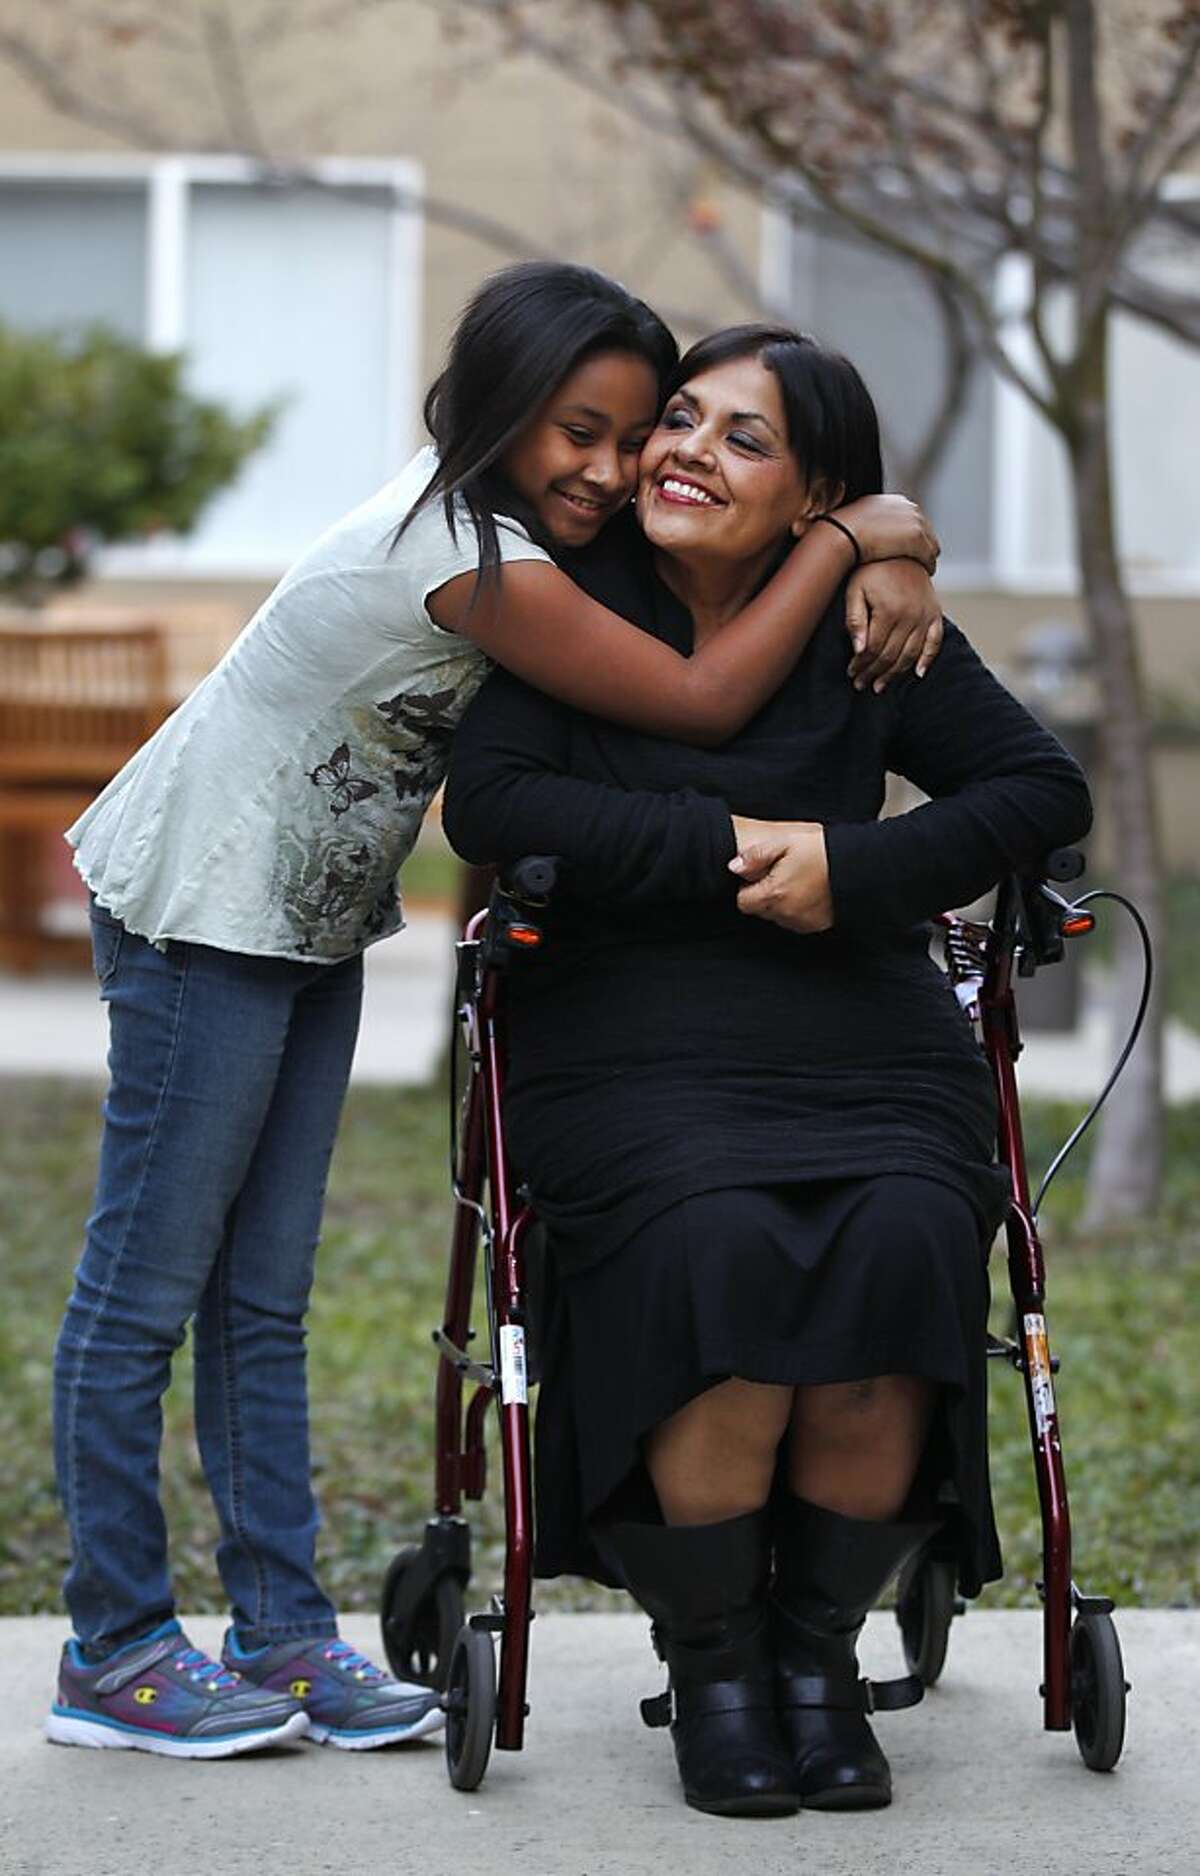 Mary Trejo, 50, right, pictured with her daughter Maryana Brooks, 10, at their new home in the Borregas Court Apartment complex December 26, 2013 in Sunnyvale, Calif. Trejo and her daughter became temporarily homeless after she was injured on the job during core training at the Santa Clara County Juvenile Hall in 2011 and was then unable to work and thus unable to make her house payments. Trejo recently had a full knee replacement after re-injuring herself earlier this fall when she fell down a flight of stairs.